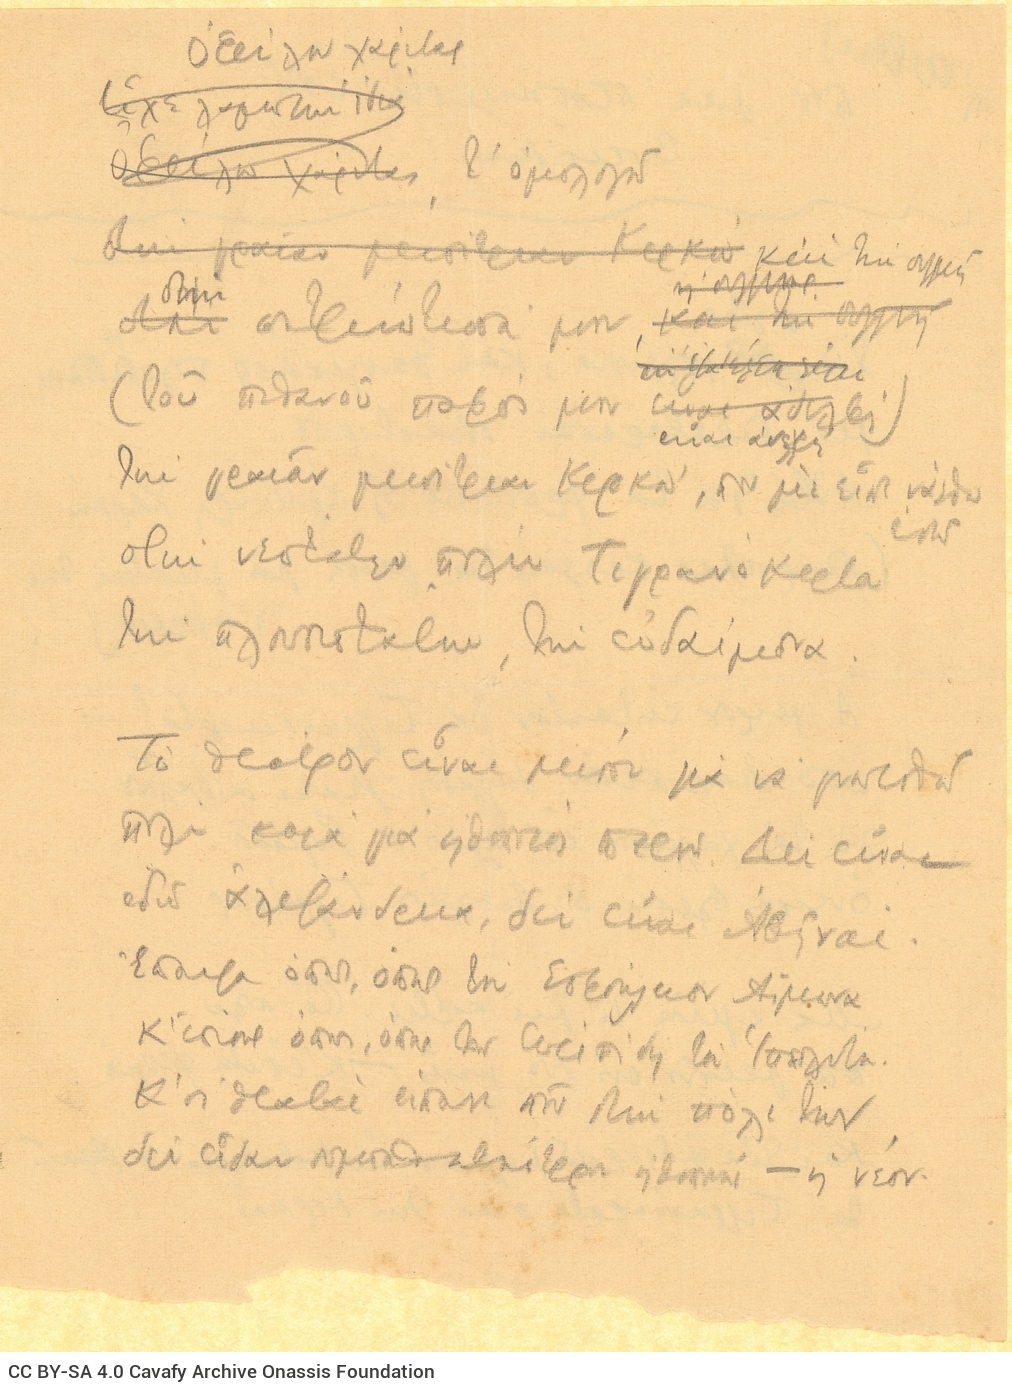 Handwritten draft of the poem "Tigranocerta" on two sheets. The verso of the second sheet is blank. Handmade folder with t